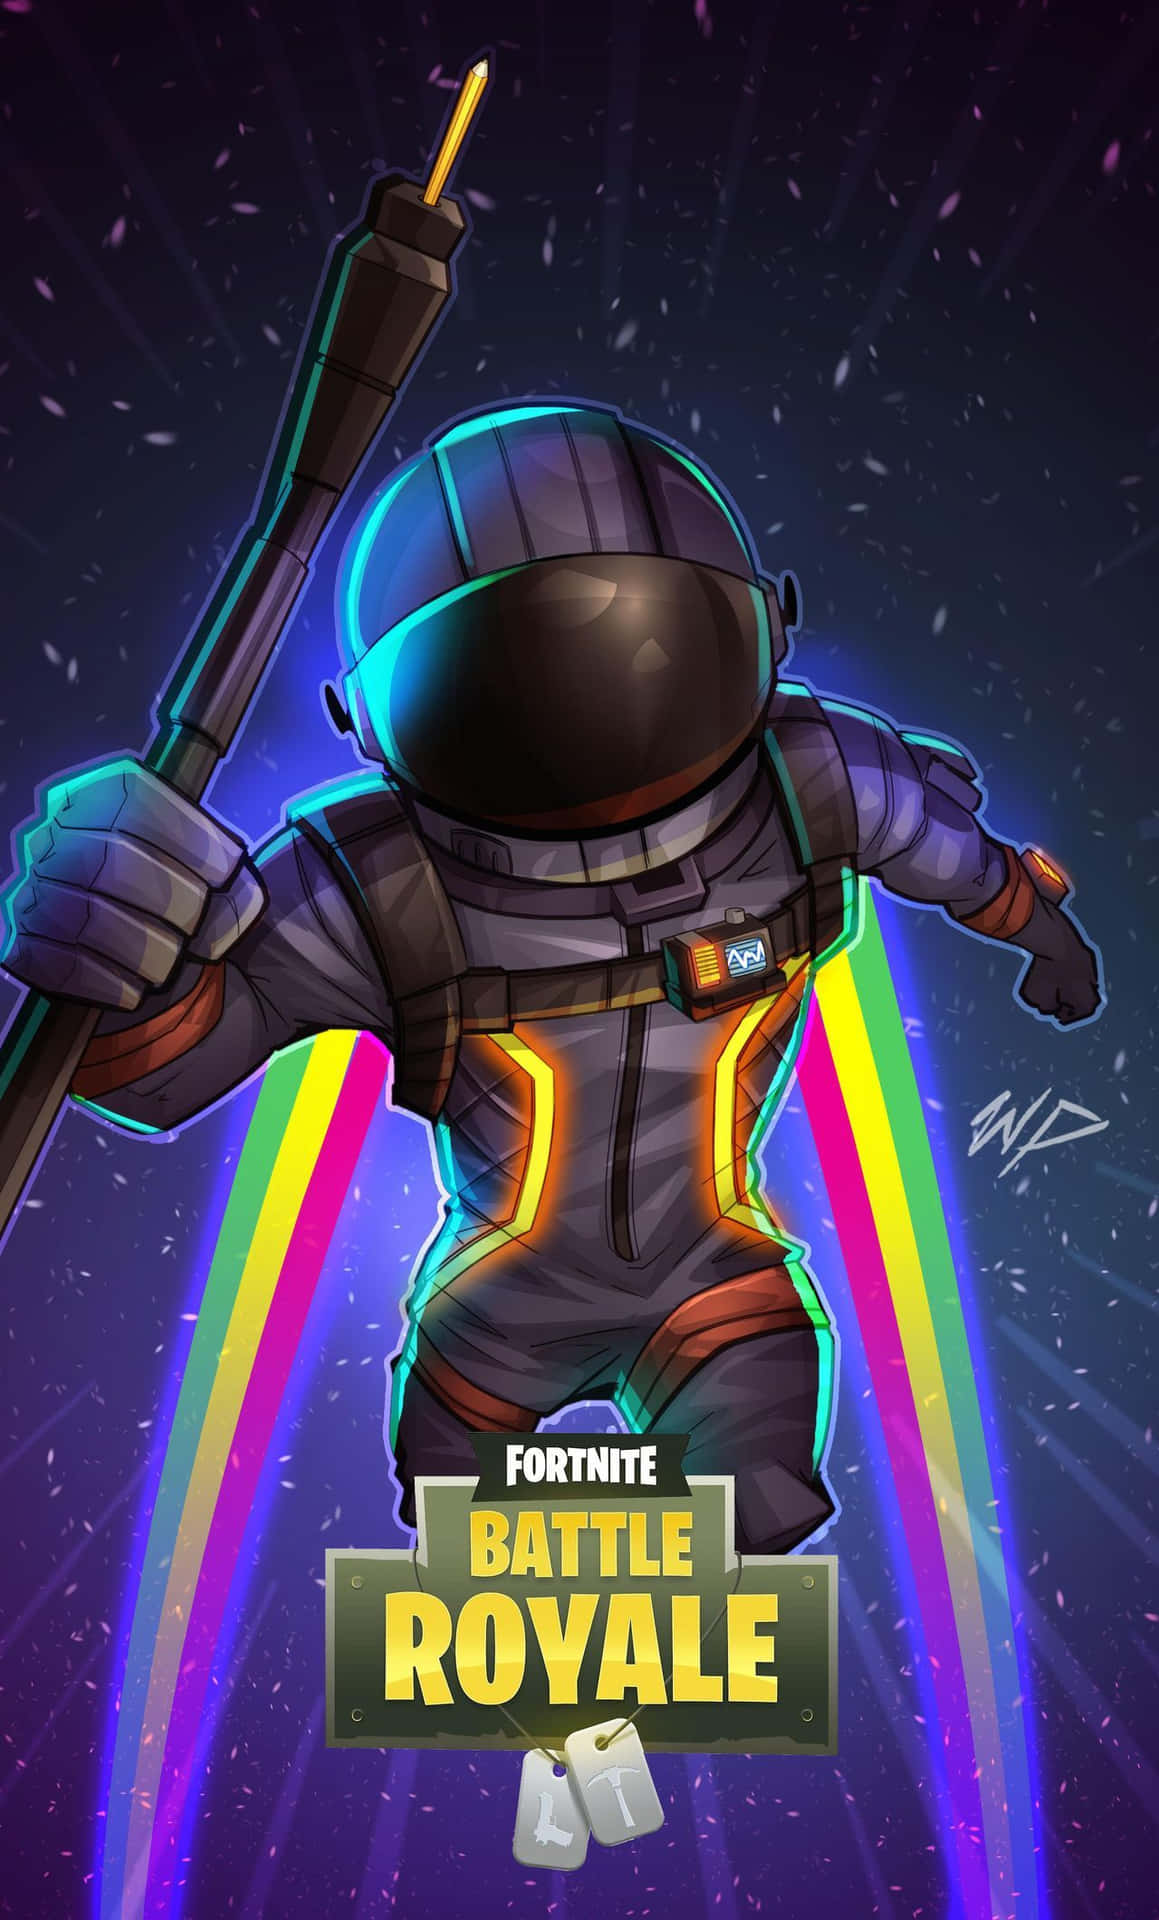 Prepare for Victory in the Battle Royale with 'Dope Fortnite' Wallpaper